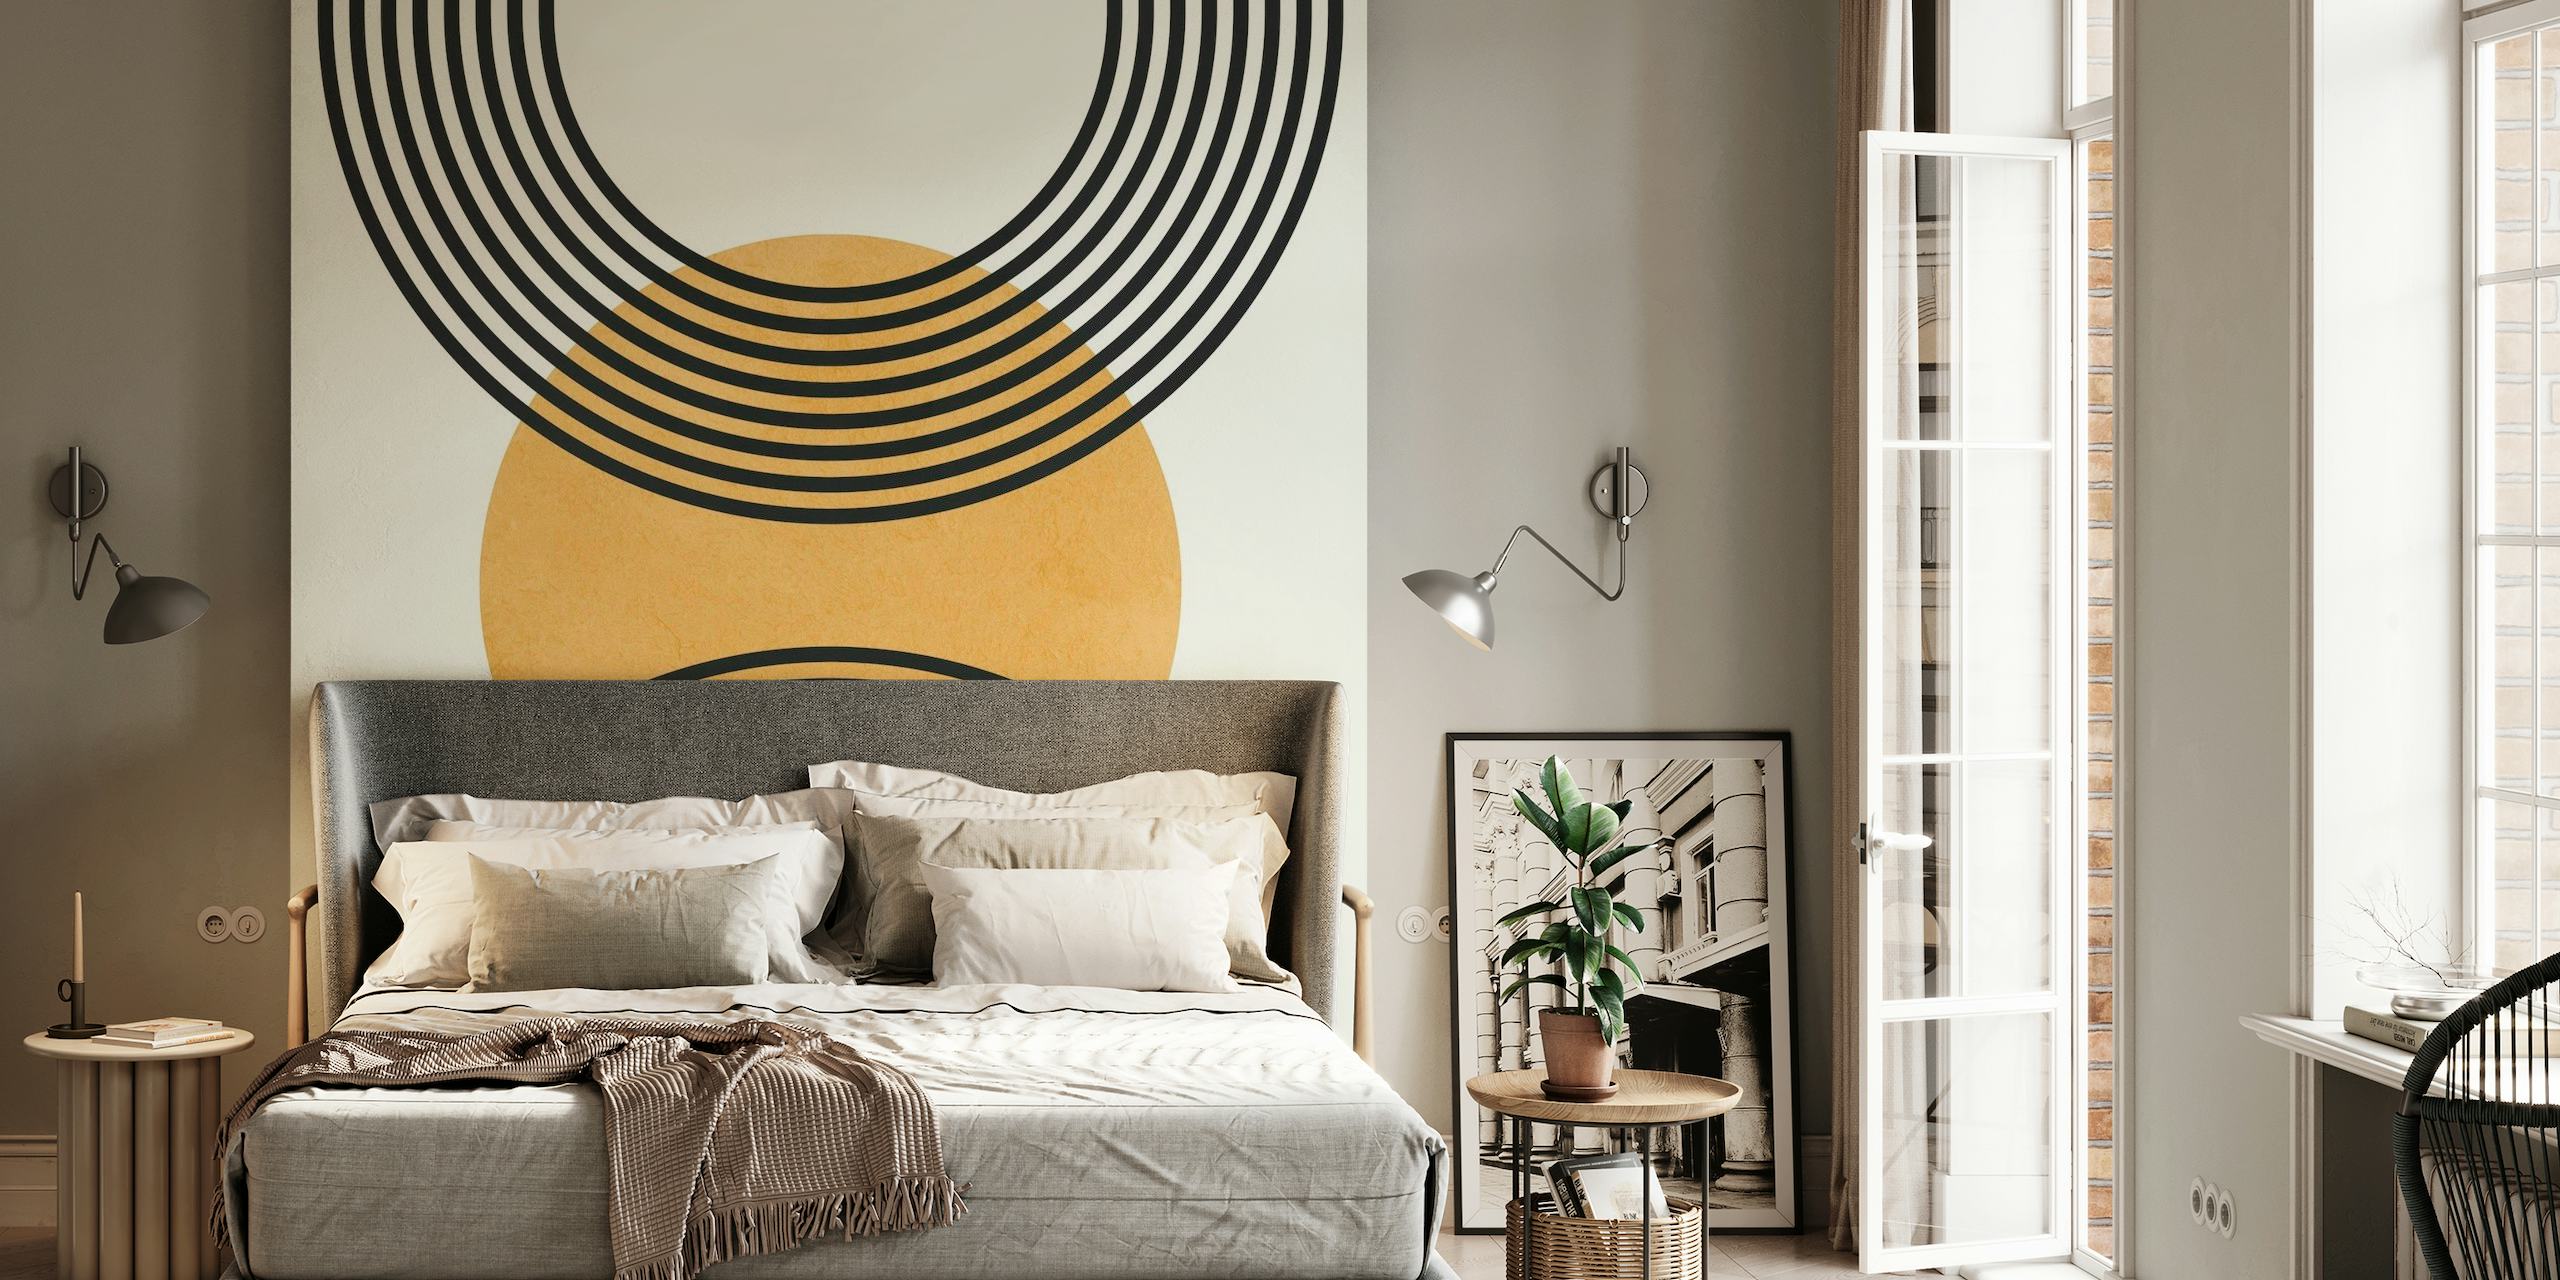 Minimalist lines and circles wall mural in black and gold tones